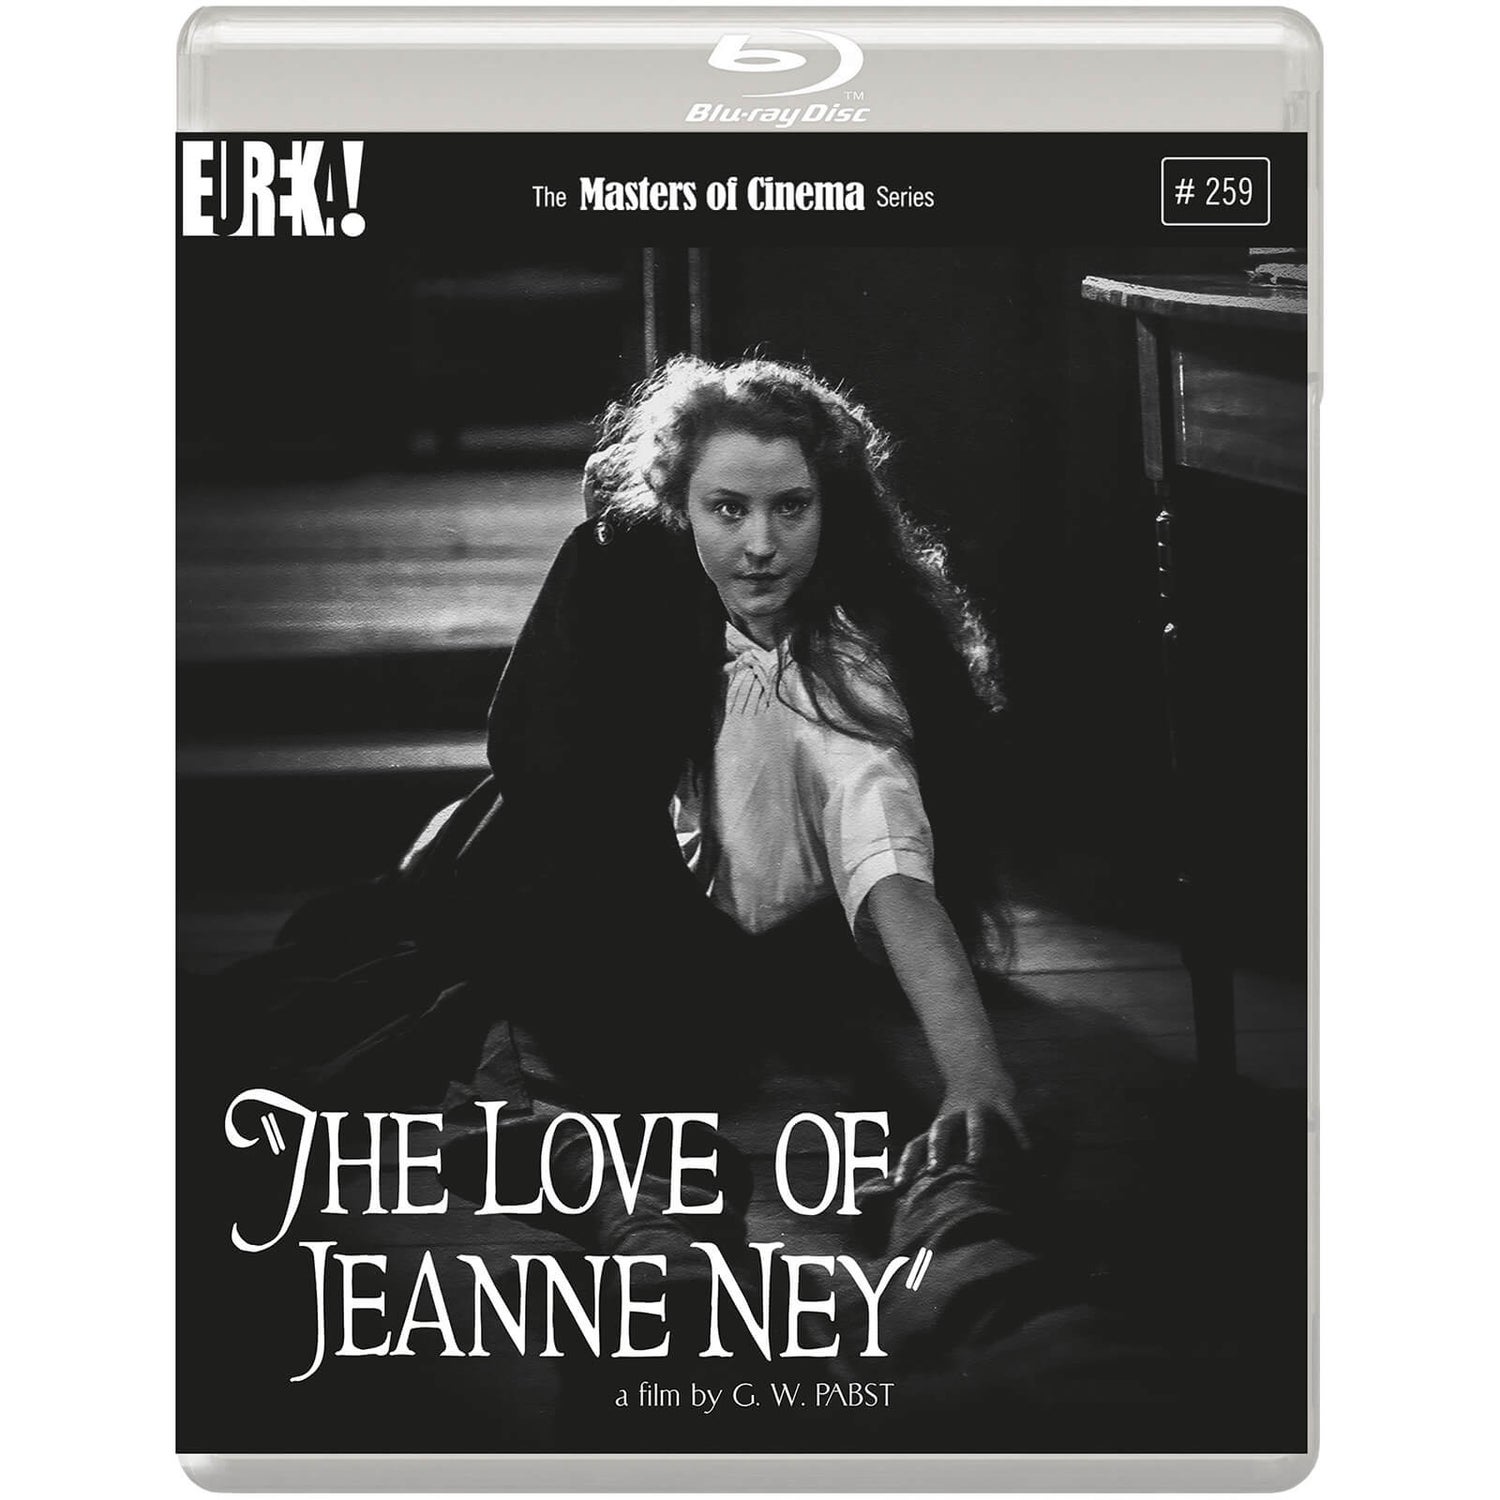 The Love of Jeanne Ney - The Masters of Cinema Series